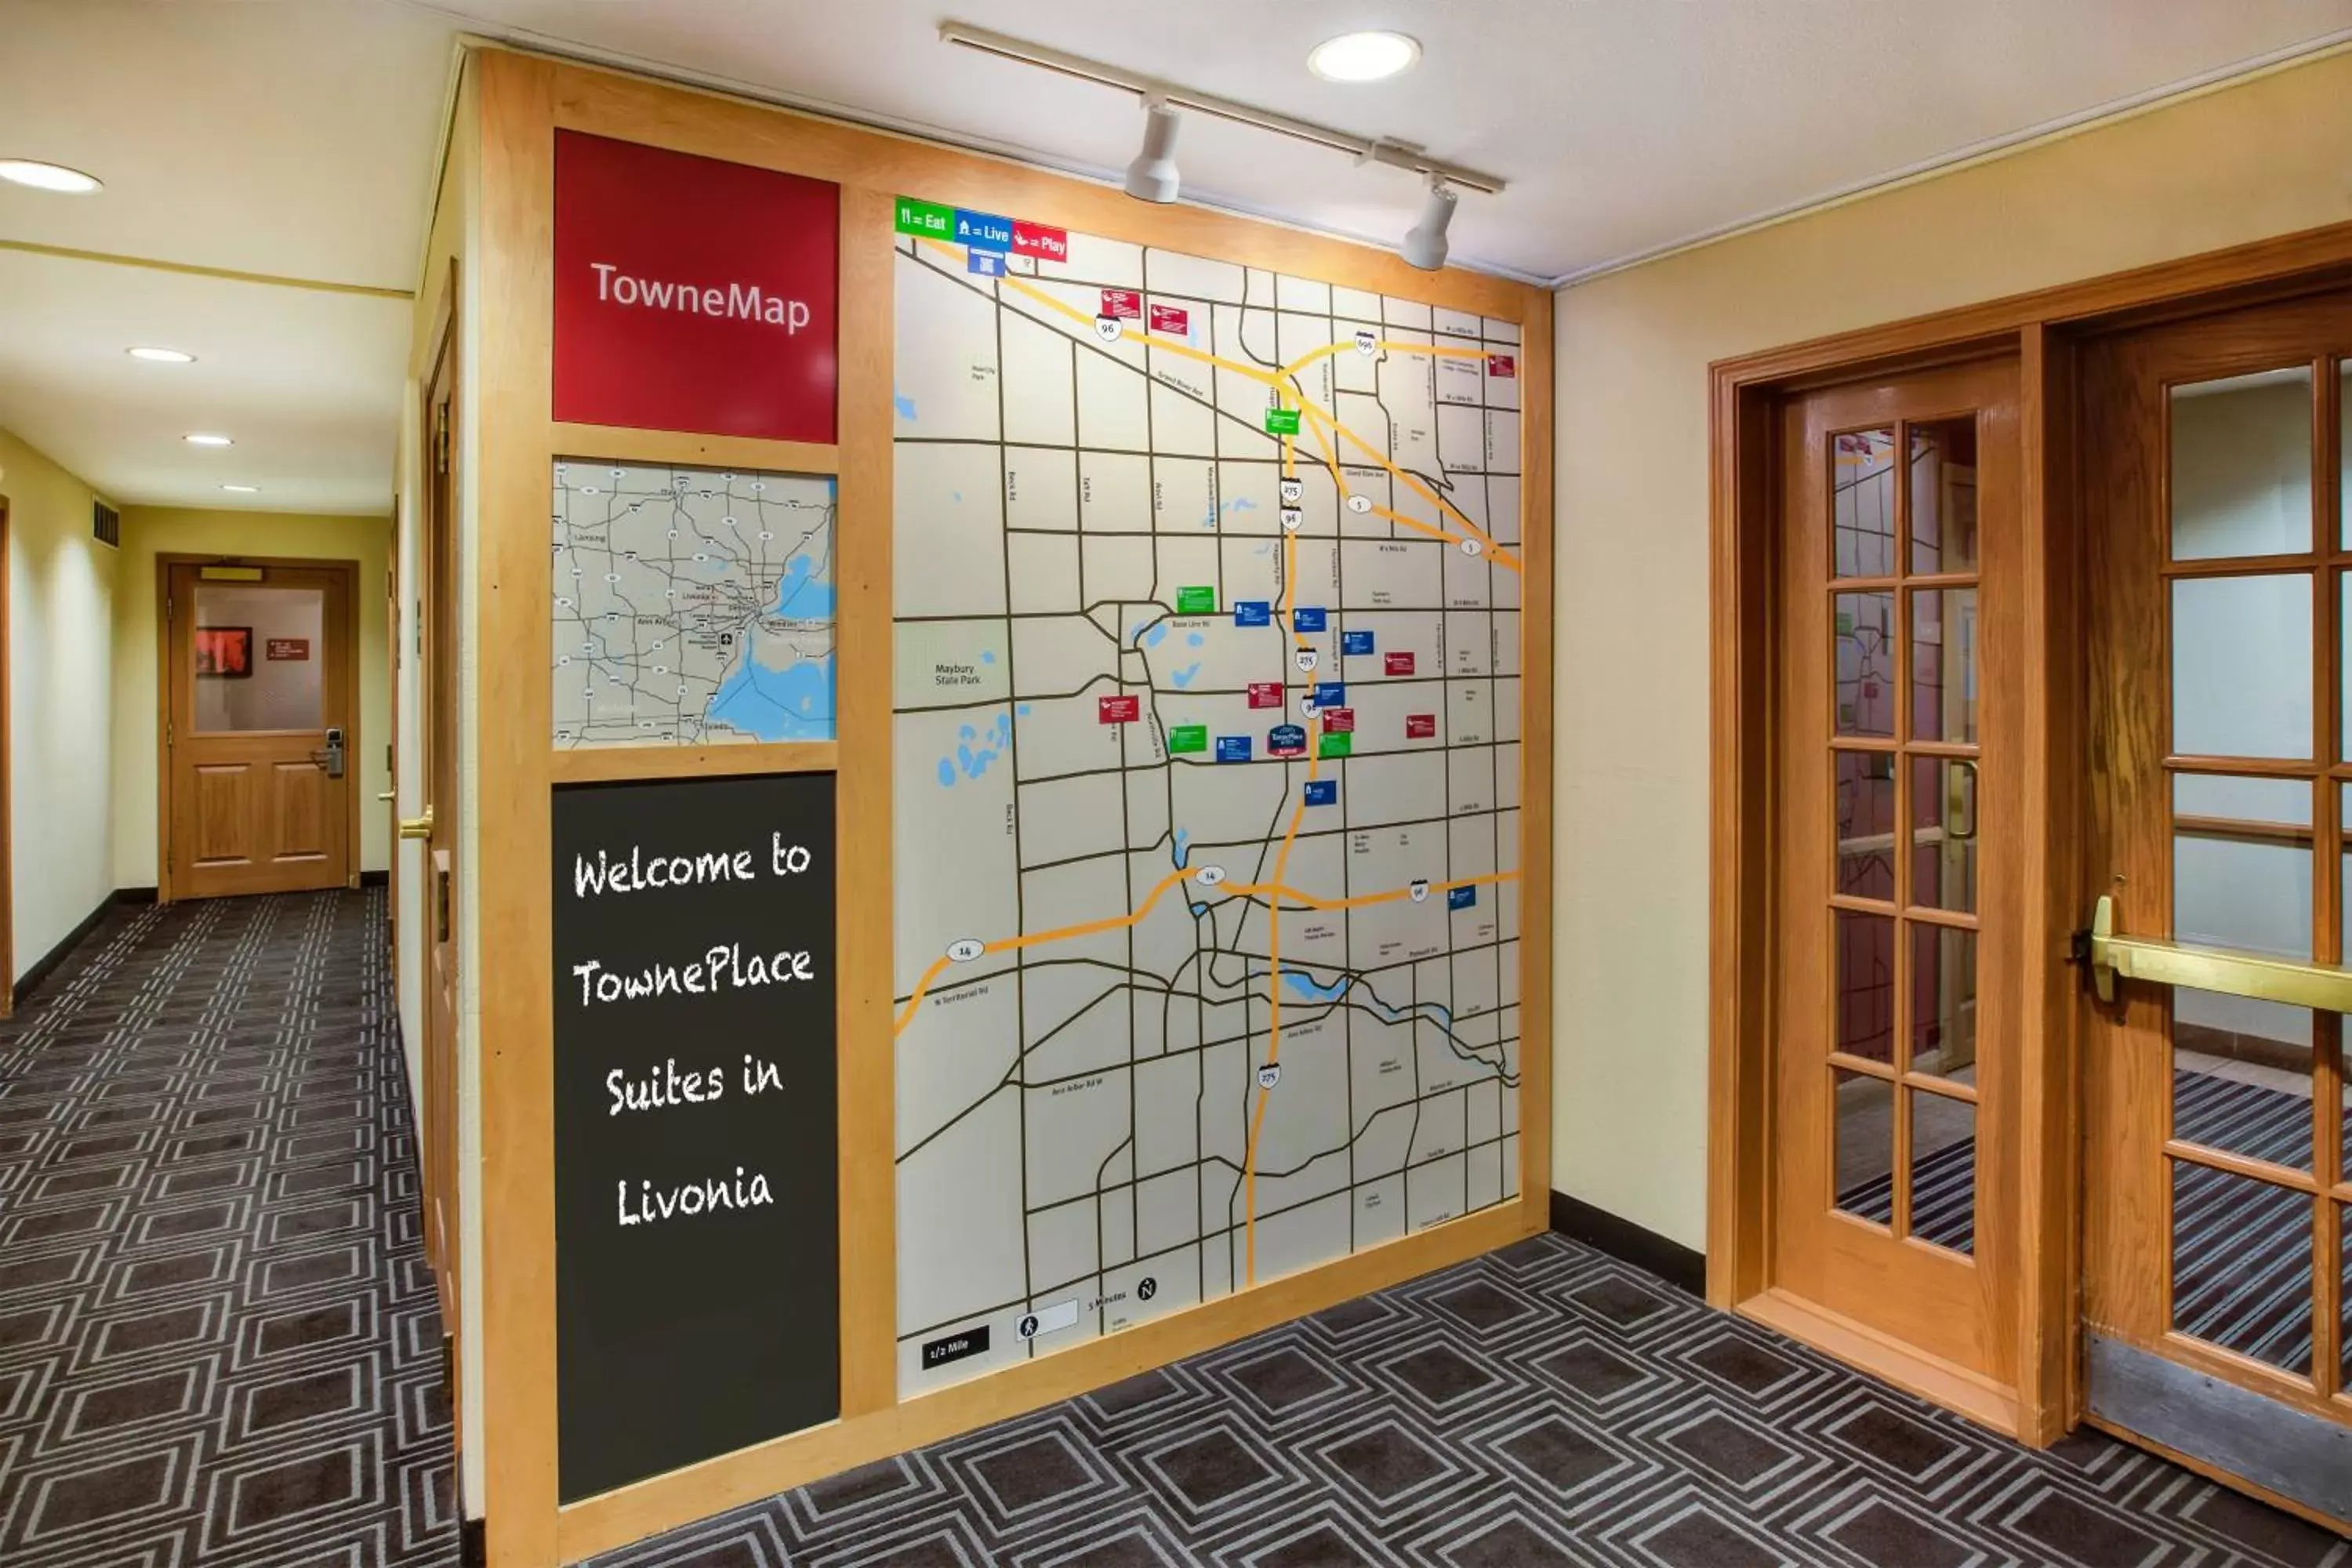 Location in TownePlace Suites by Marriott Detroit Livonia